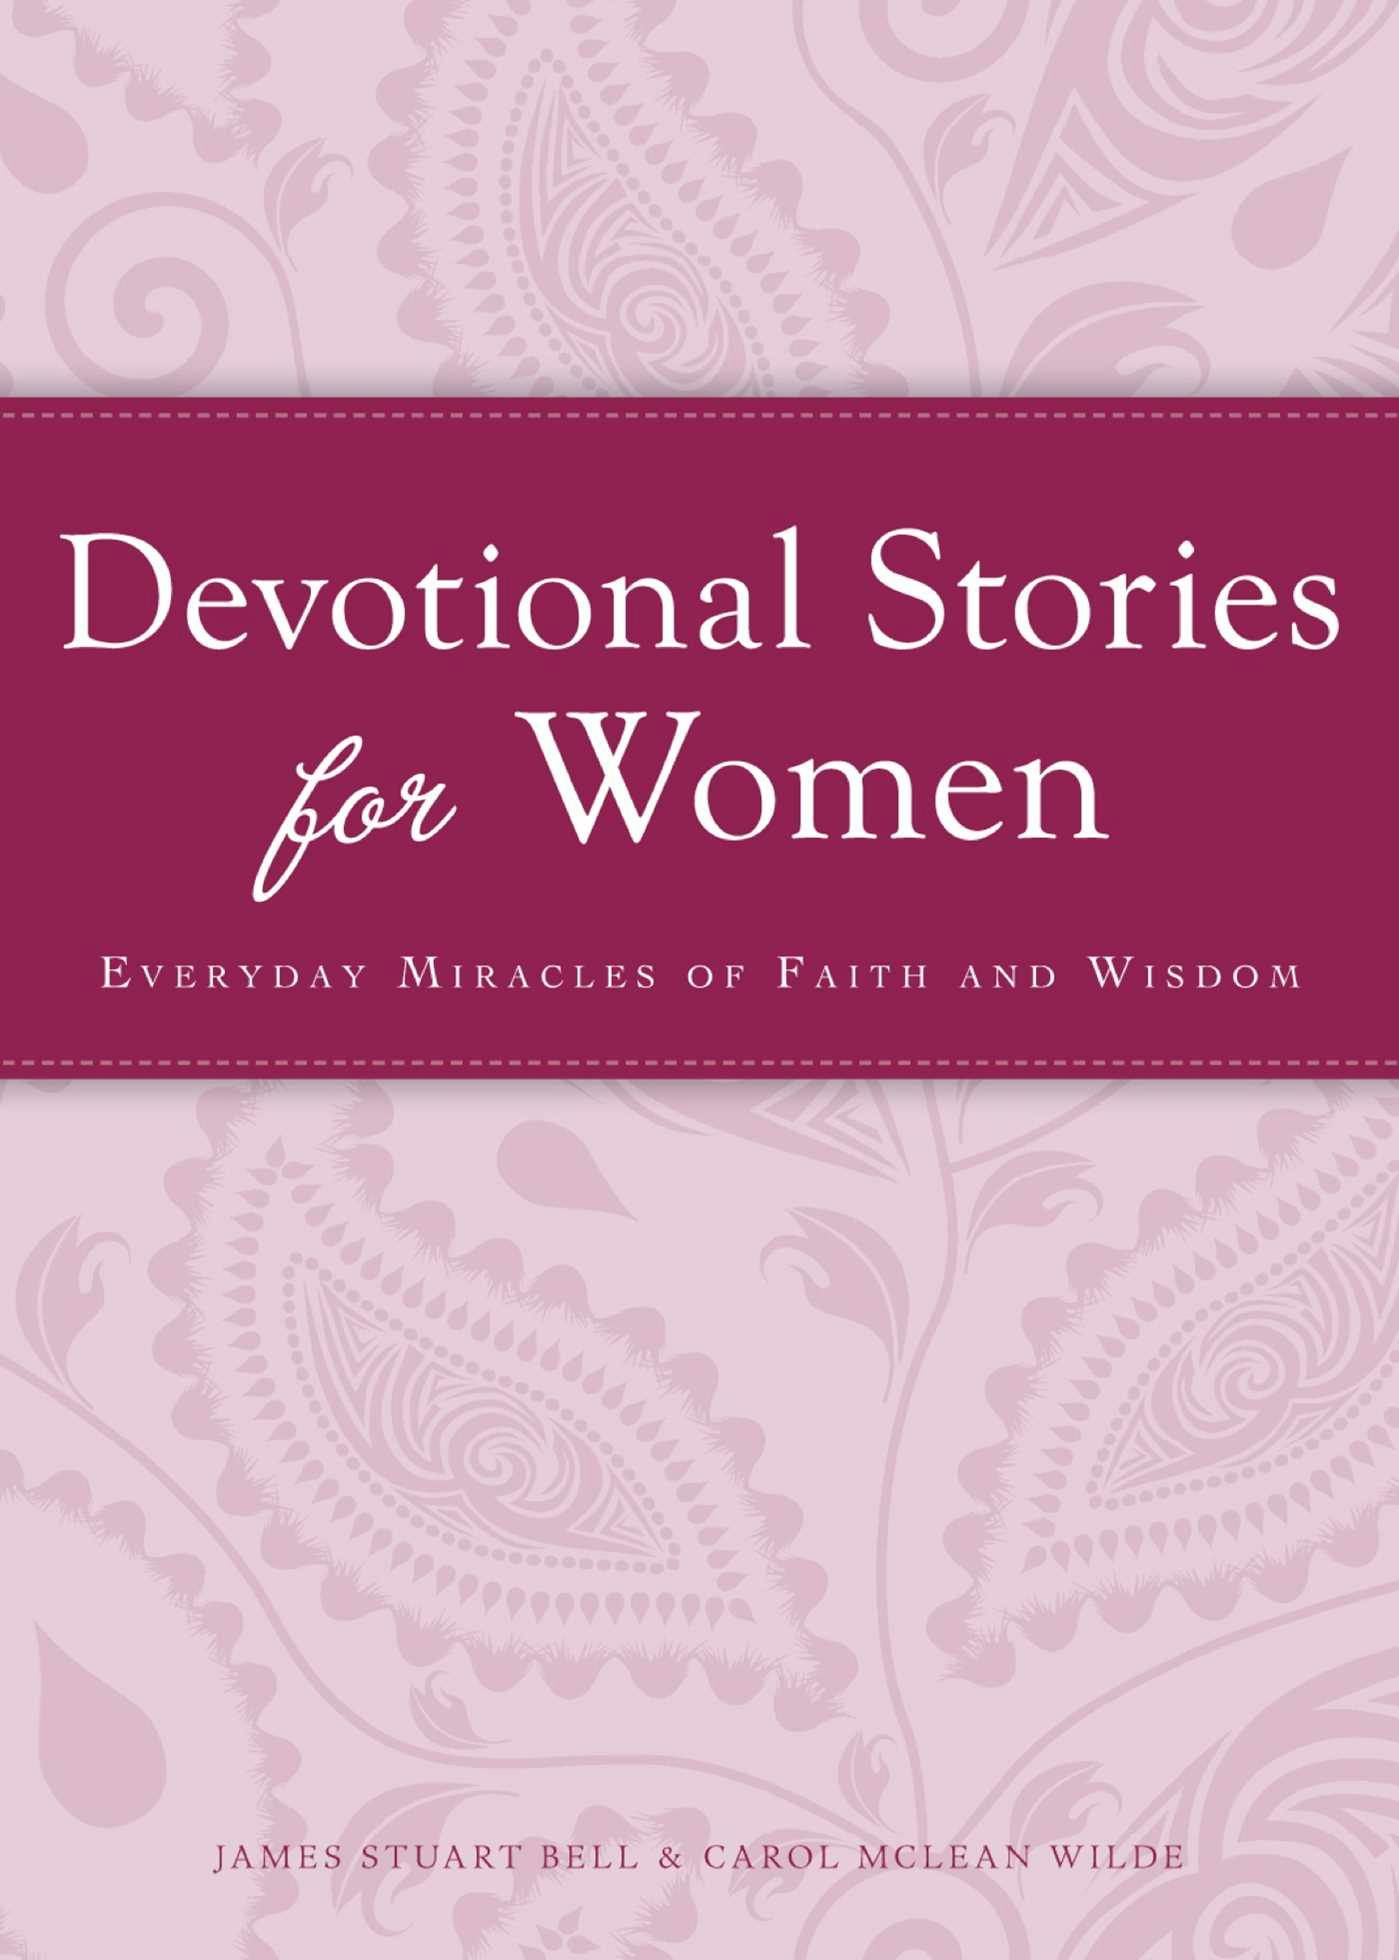 Devotional Stories for Women: Everyday miracles of faith and wisdom - James Stuart Bell, Carol McLean Wilde